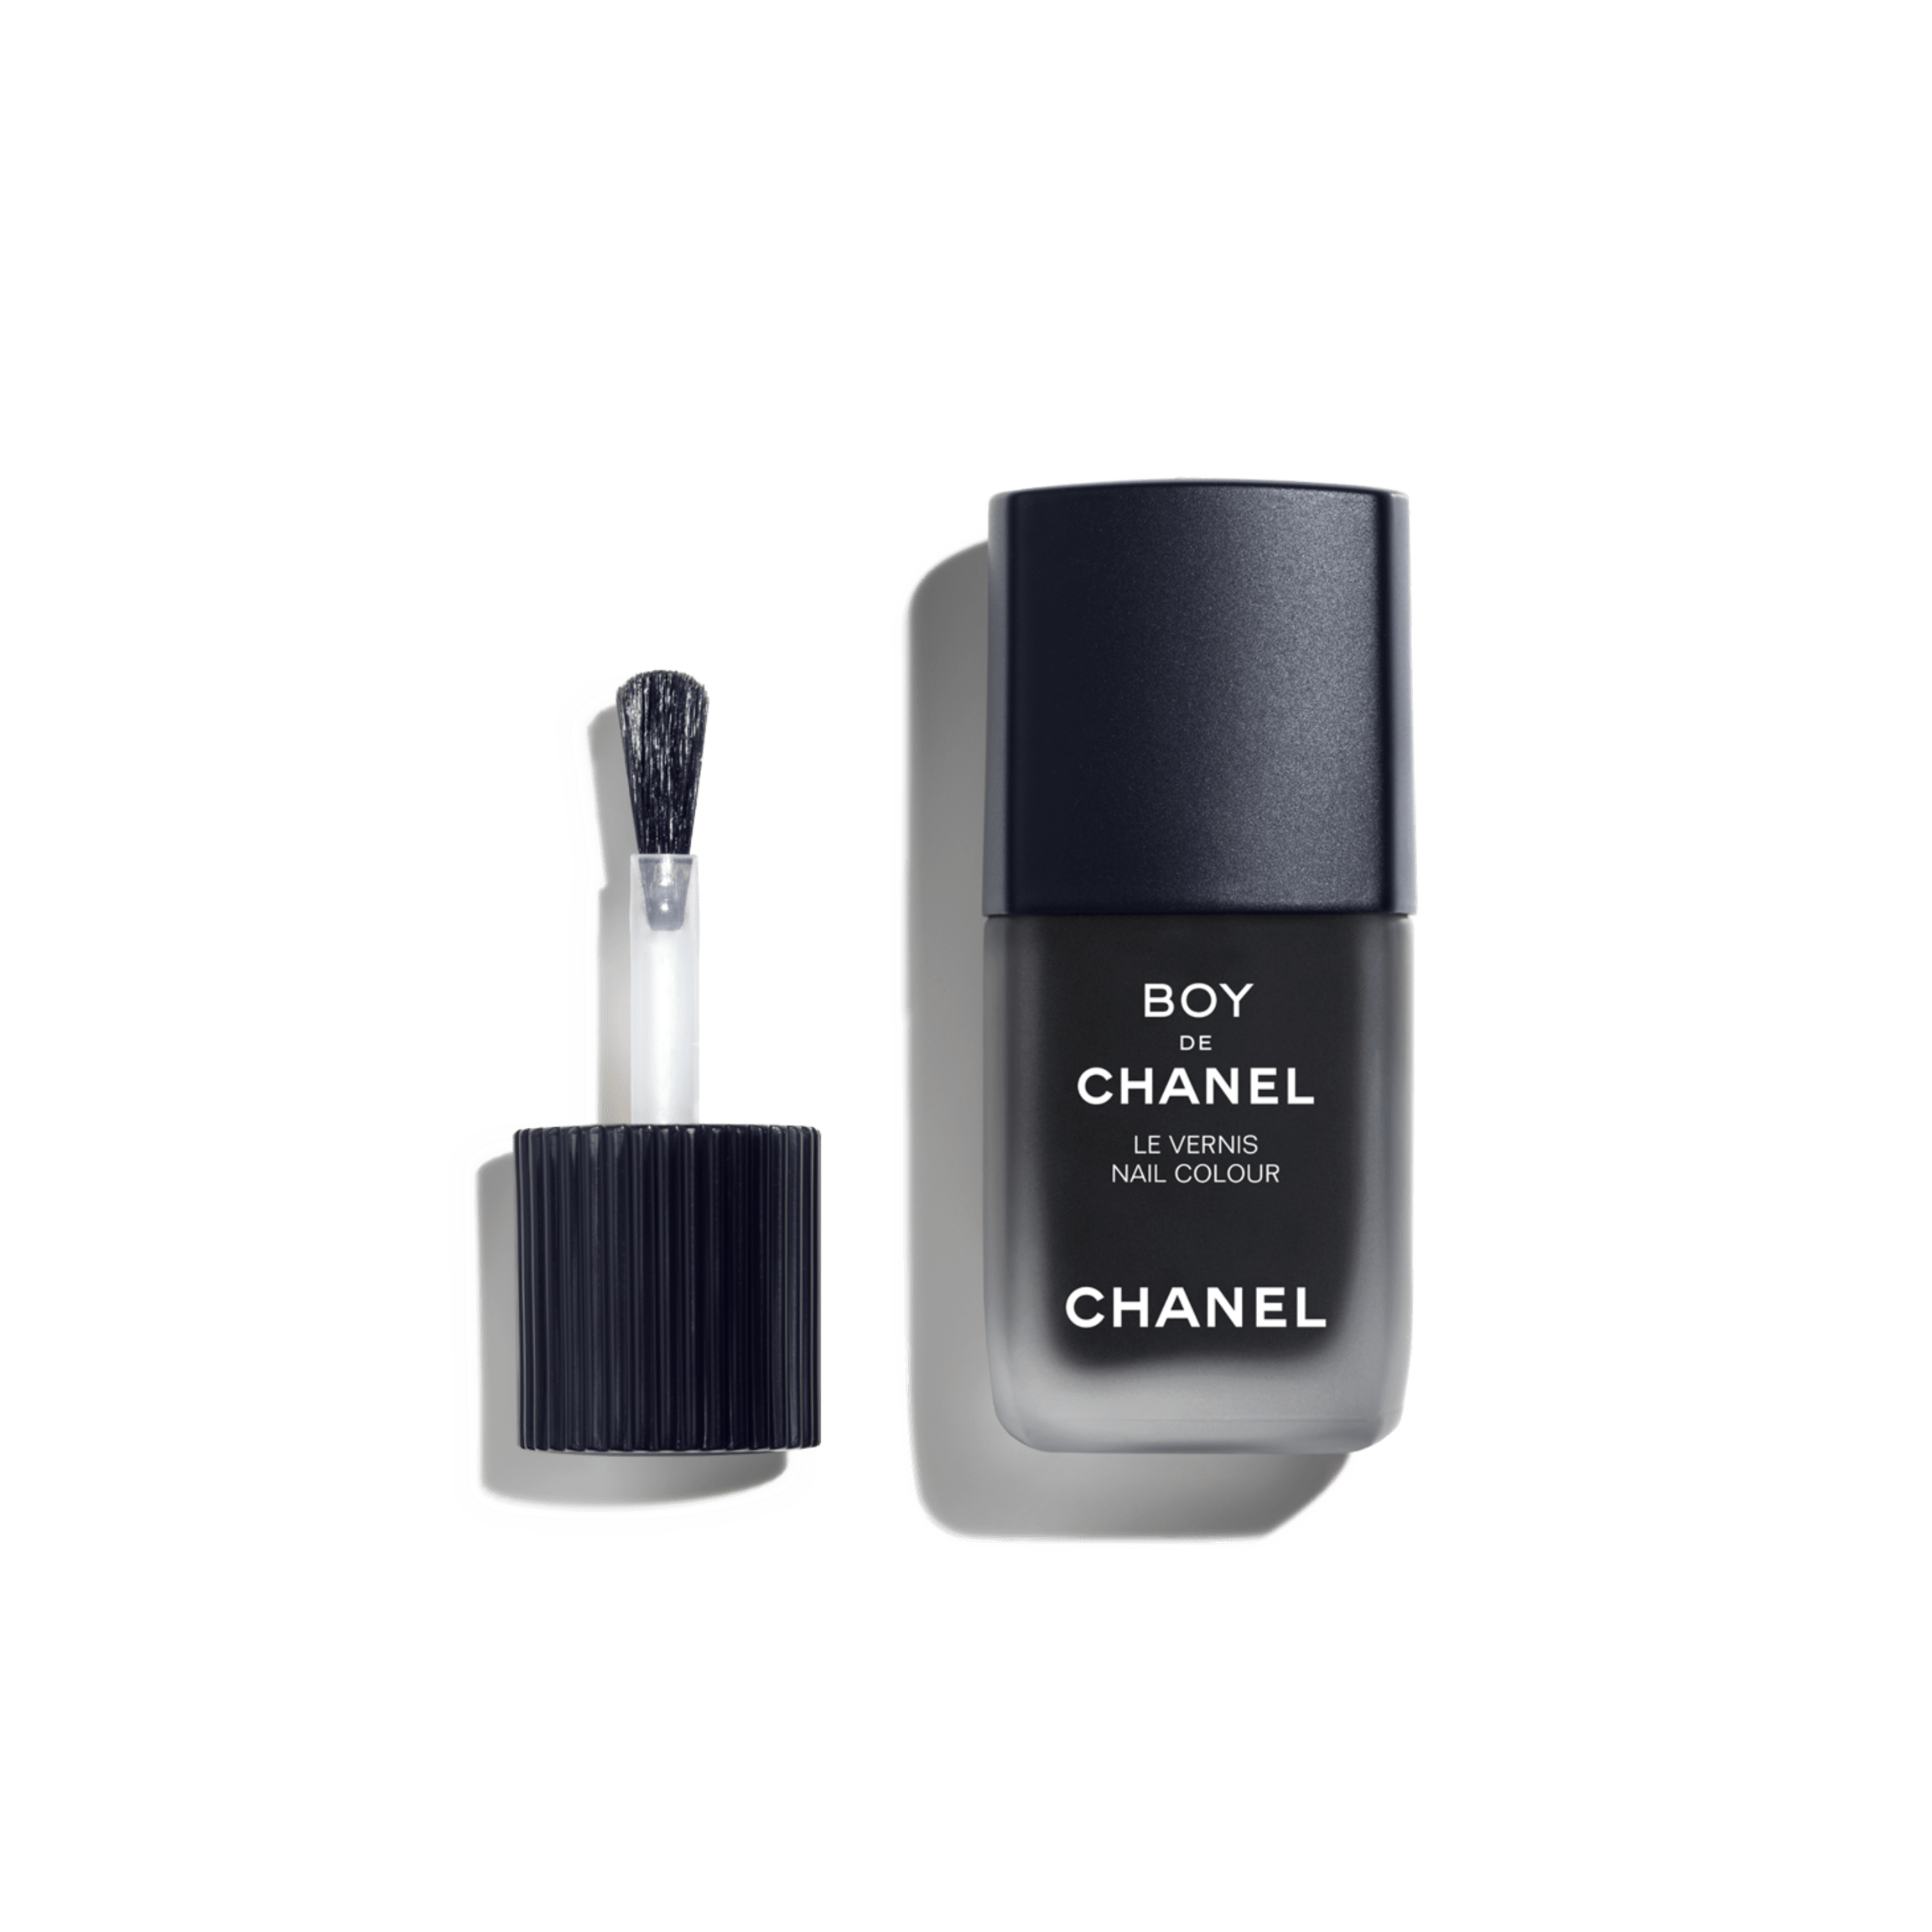 NEW LIMITED amp EXCLUSIVE CHANEL BOY DE CHANEL Le Vernis Nail Polish 402  NATURAL  eBay